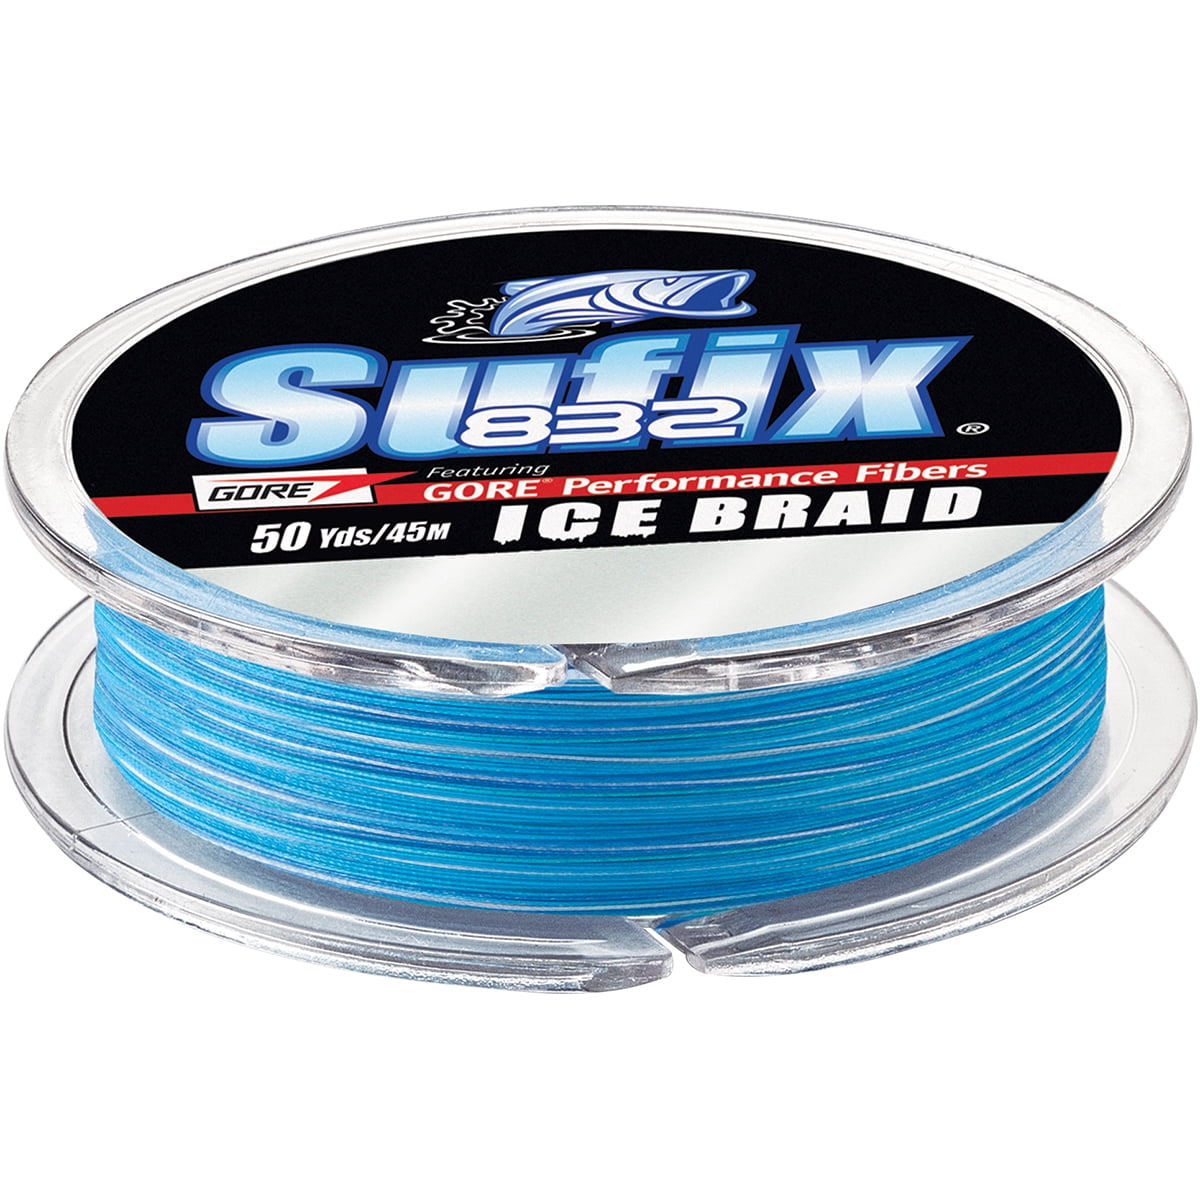 Seaguar 50S16W600 Threadlock, 600yd 50lb : Superbraid And Braided Fishing  Line : Sports & Outdoors 